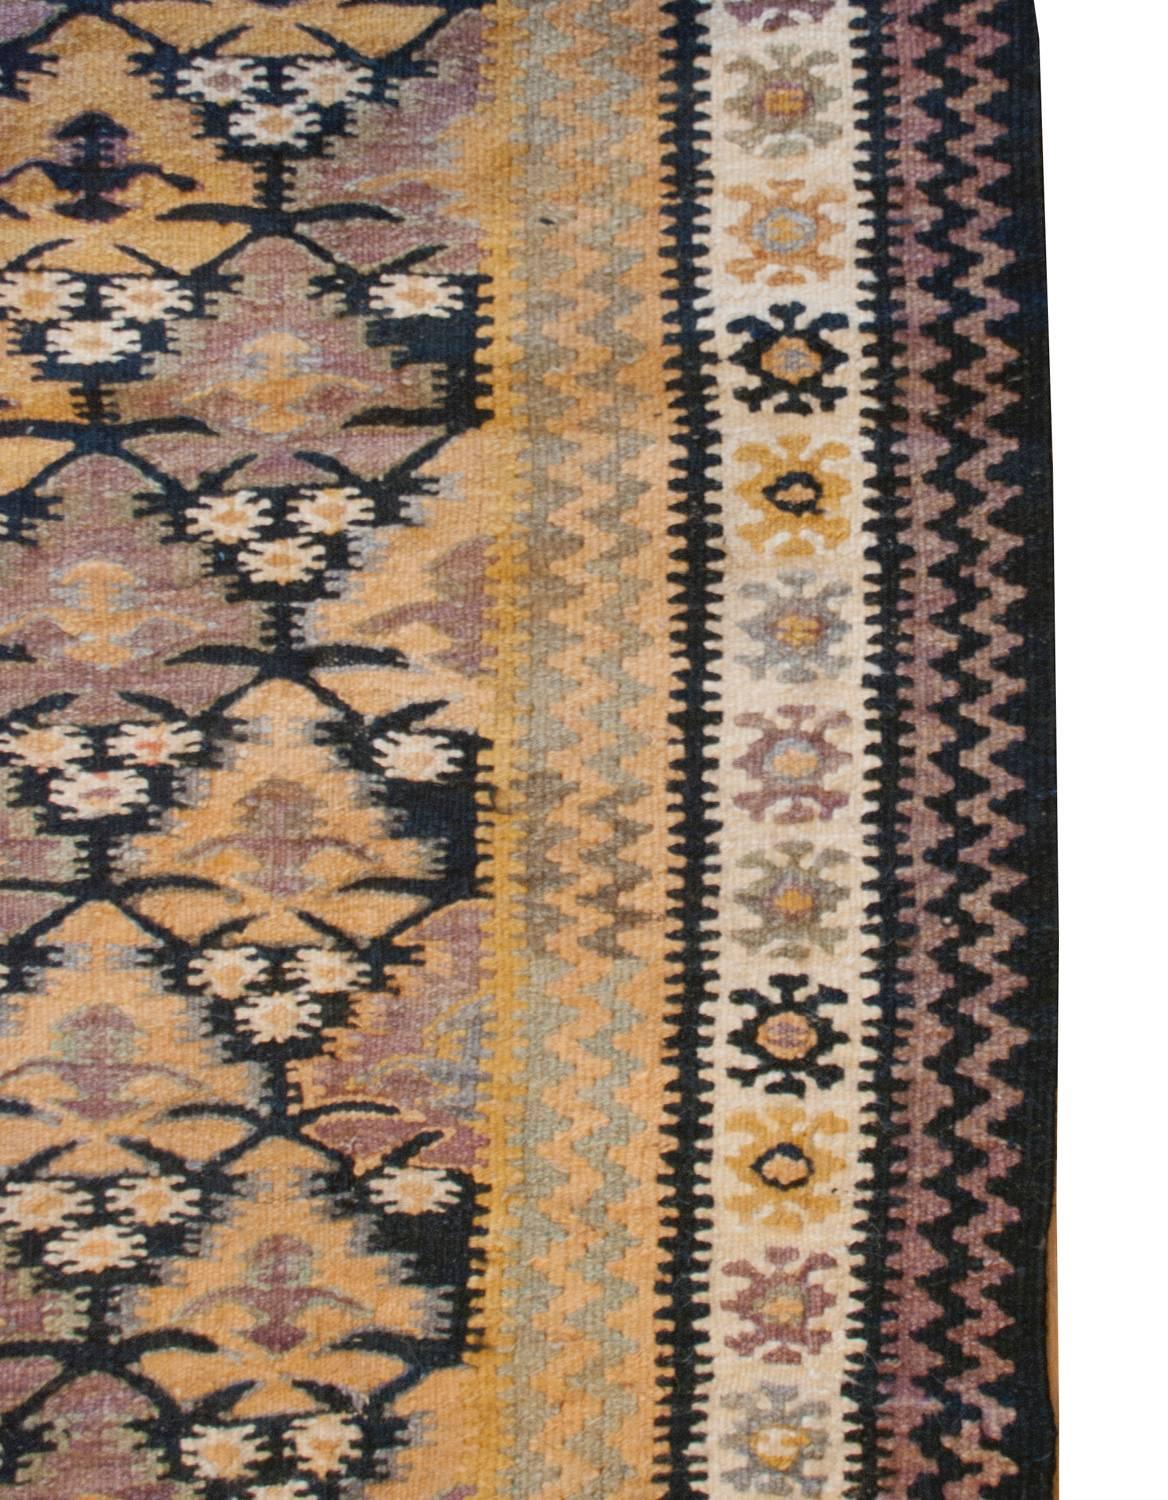 Vegetable Dyed Beautiful Early 20th Century Qazvin Kilim For Sale